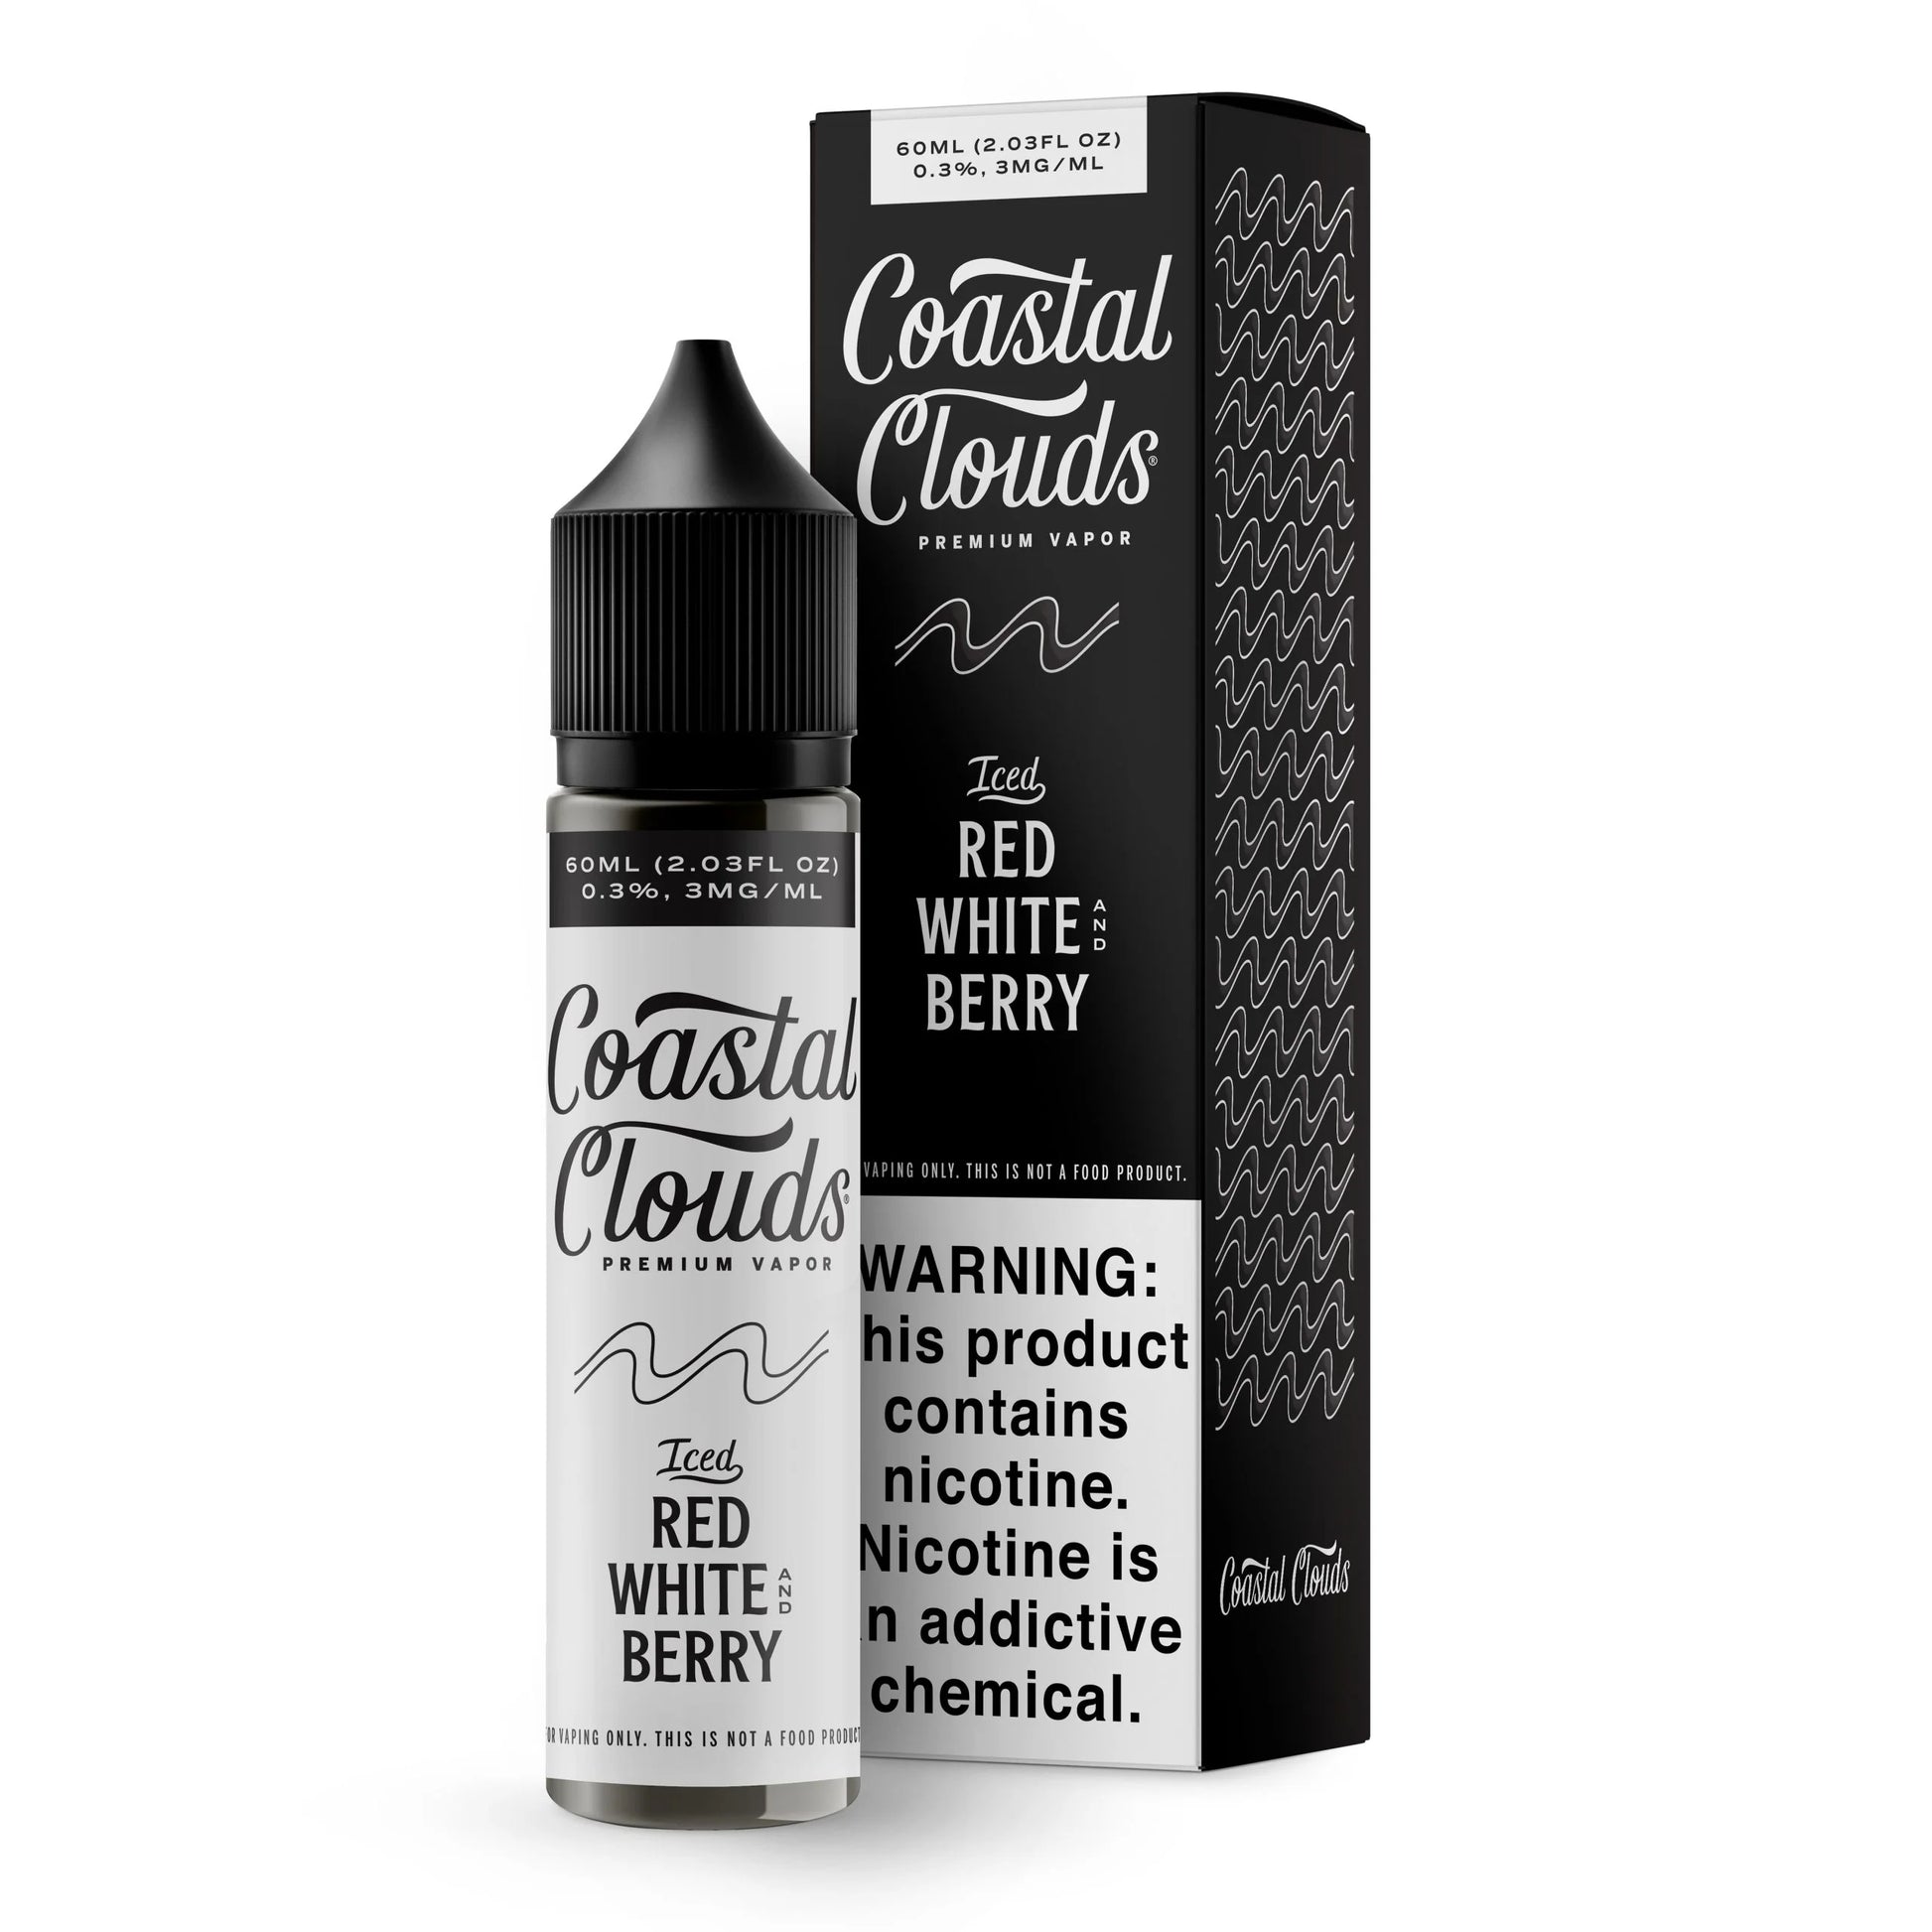 Red White and Berry by Coastal Clouds Series E-Liquid 60mL (Freebase) bottle with packaging